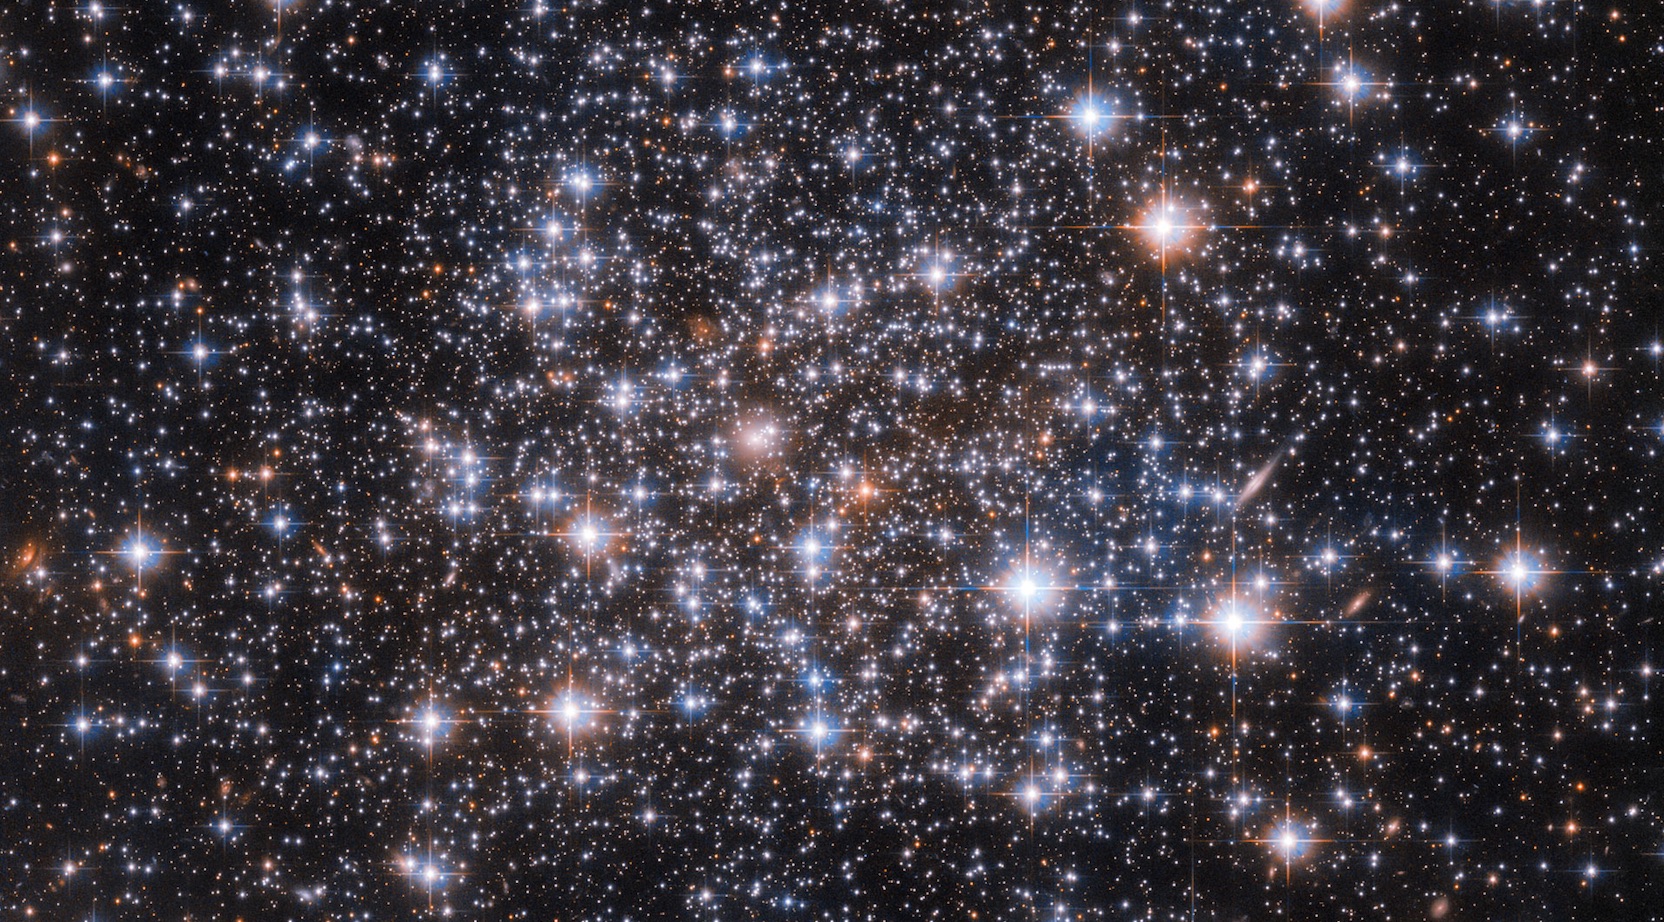 Hubble Space Telescope starstruck by a cluster Space